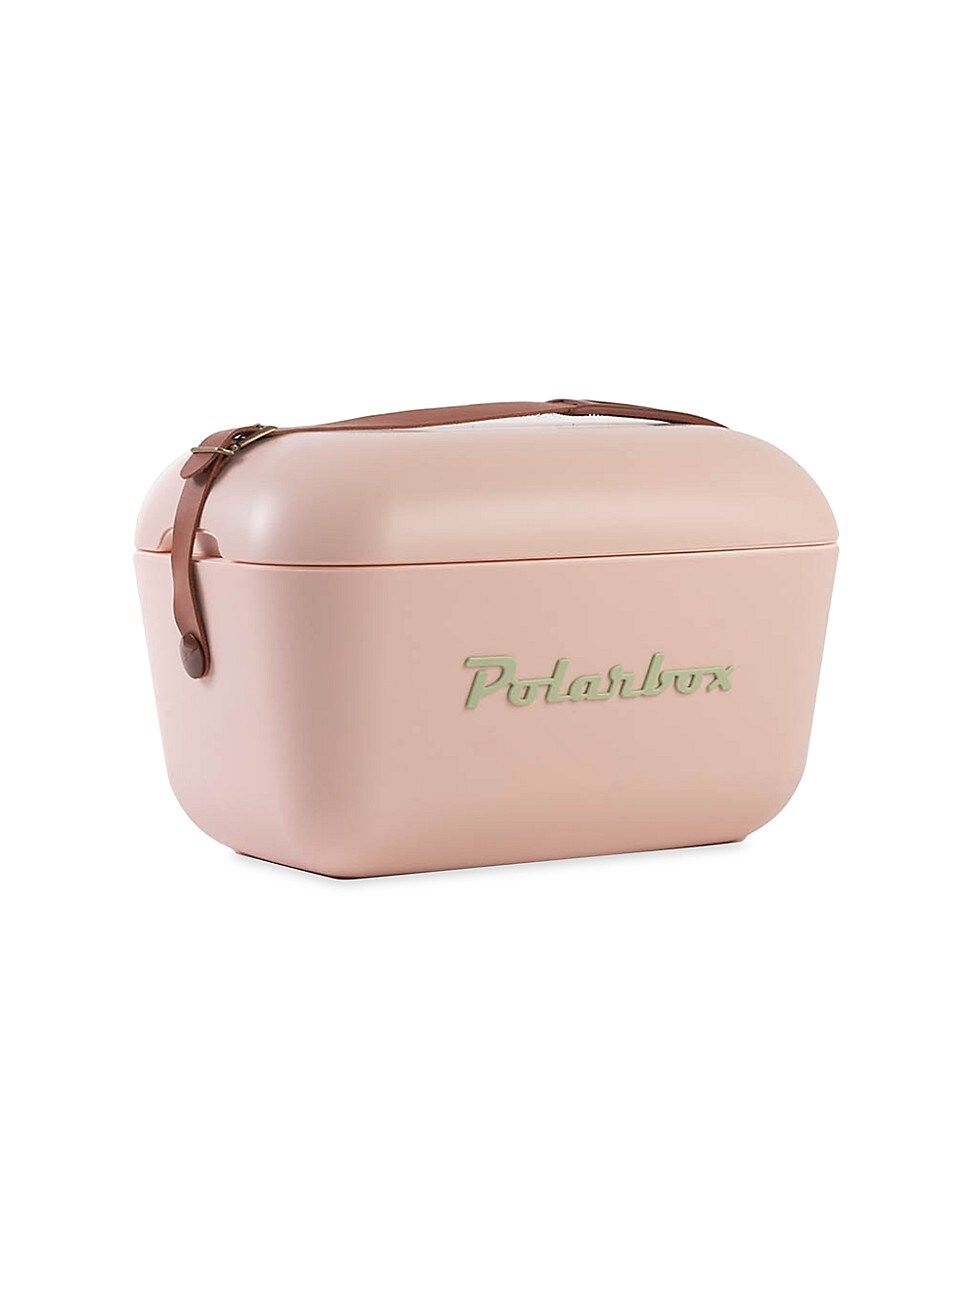 Polarbox Portable Cooler - Pink Olive Green | Saks Fifth Avenue